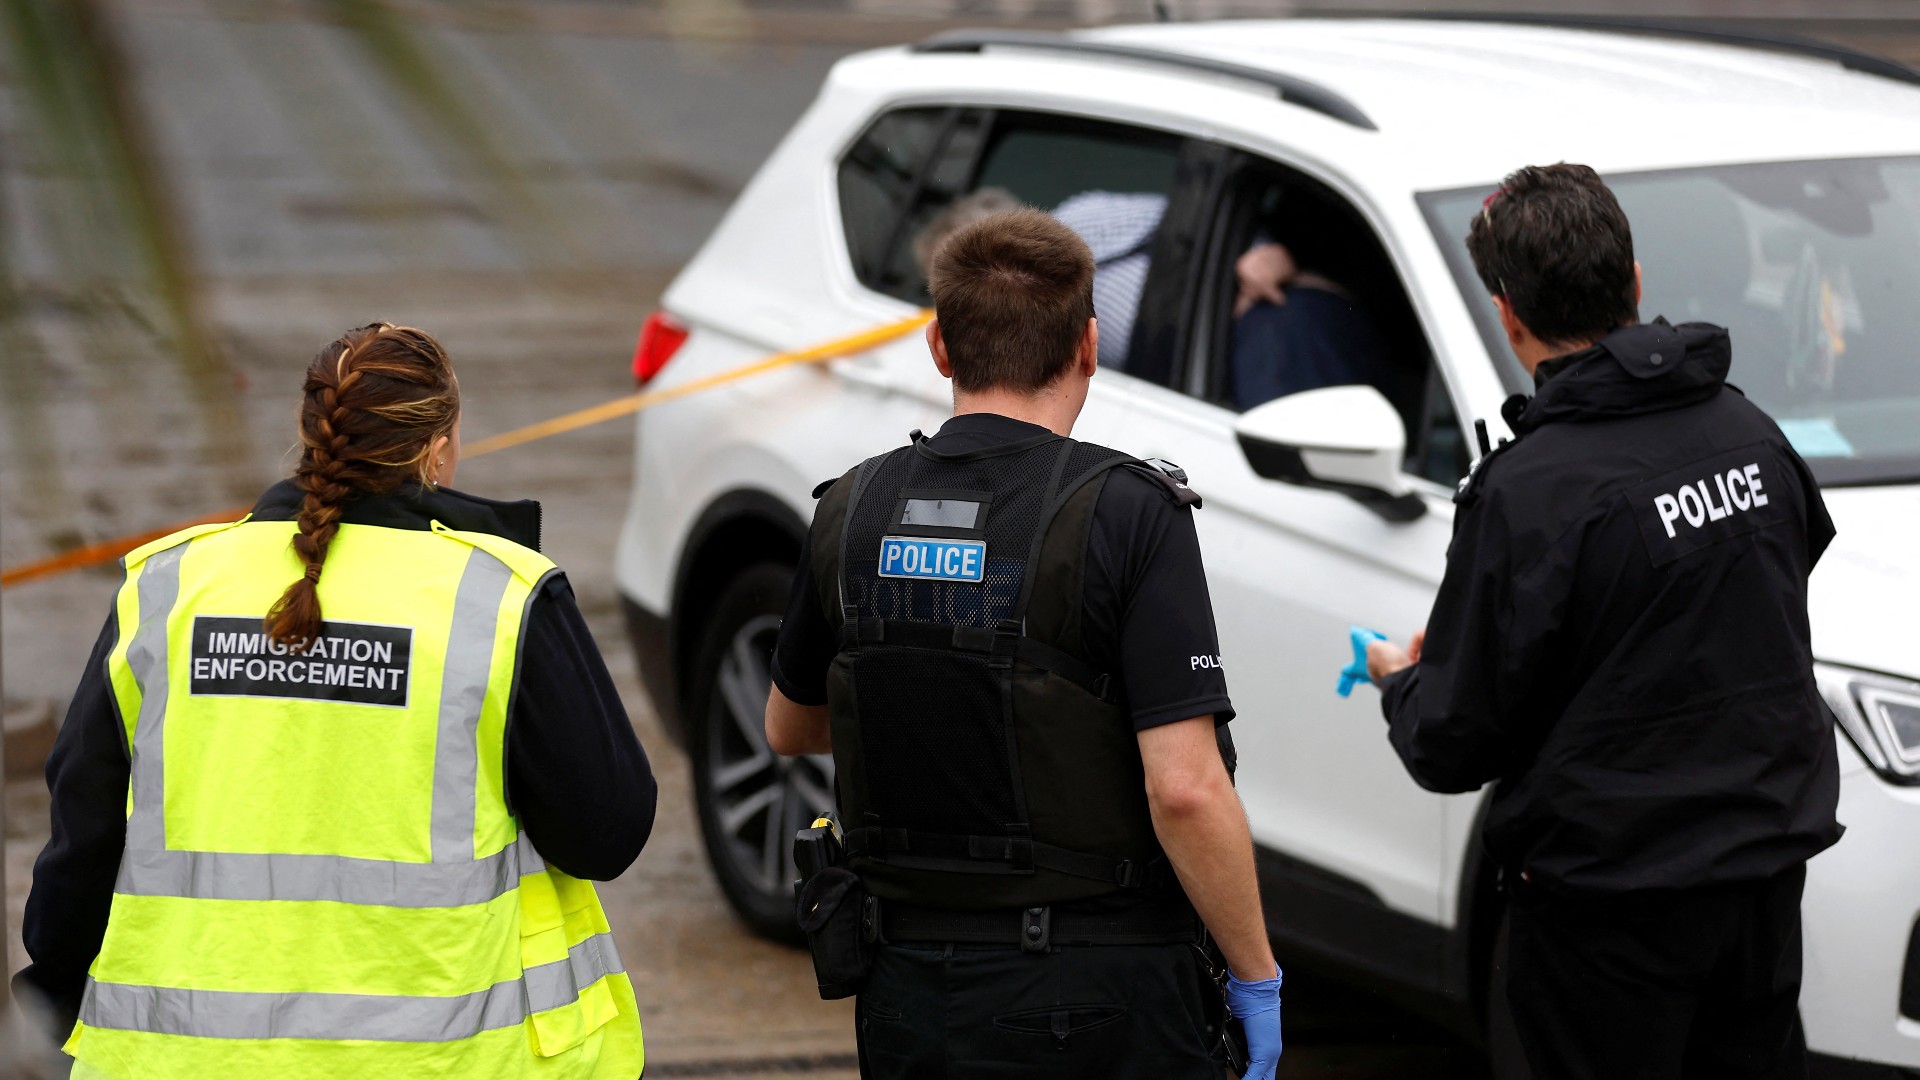 The devices were witnessed being thrown from a car at the Border Force processing center. /Peter Nicholls/Reuters